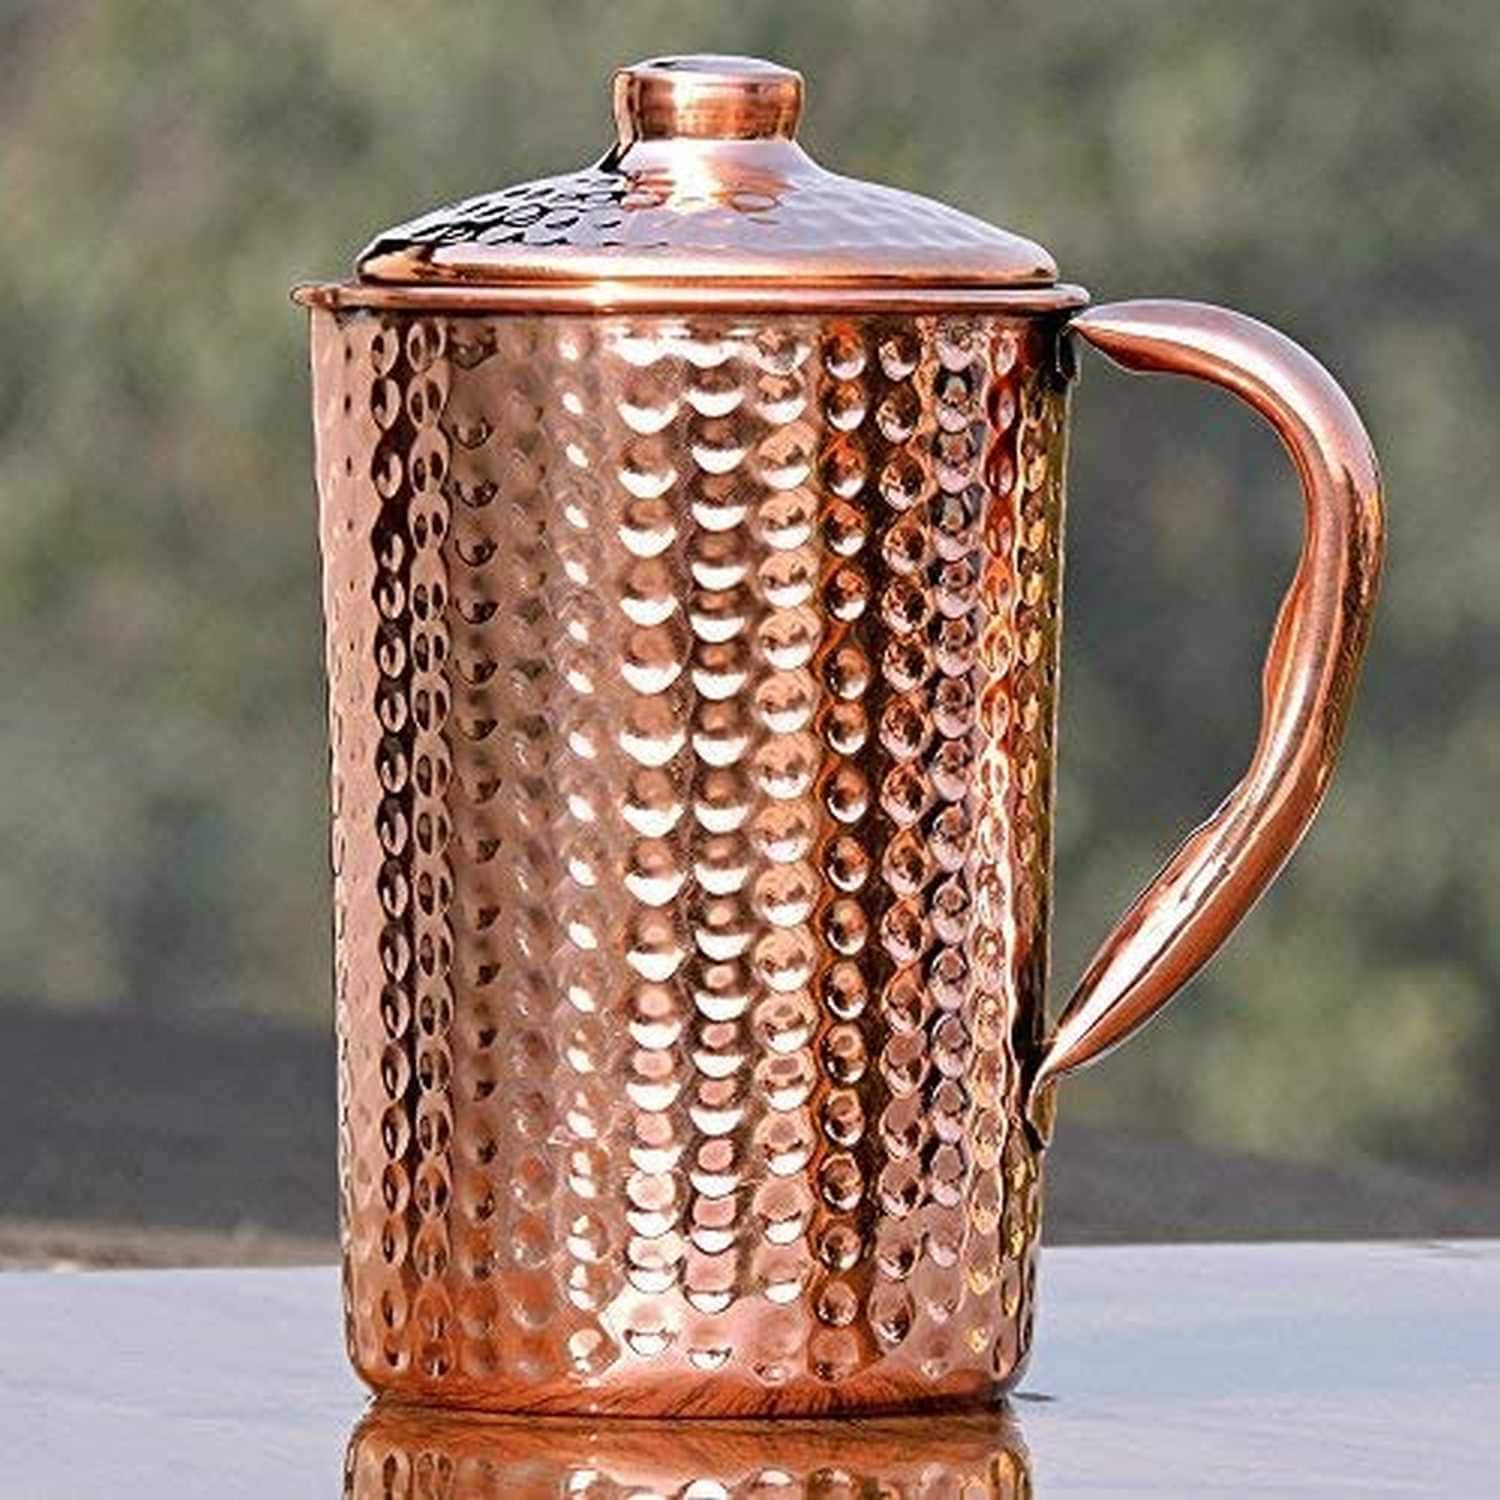 100% Pure Copper Water Pitcher Pot r 1.5 Ltr For Drinking Water New Hammered jug 